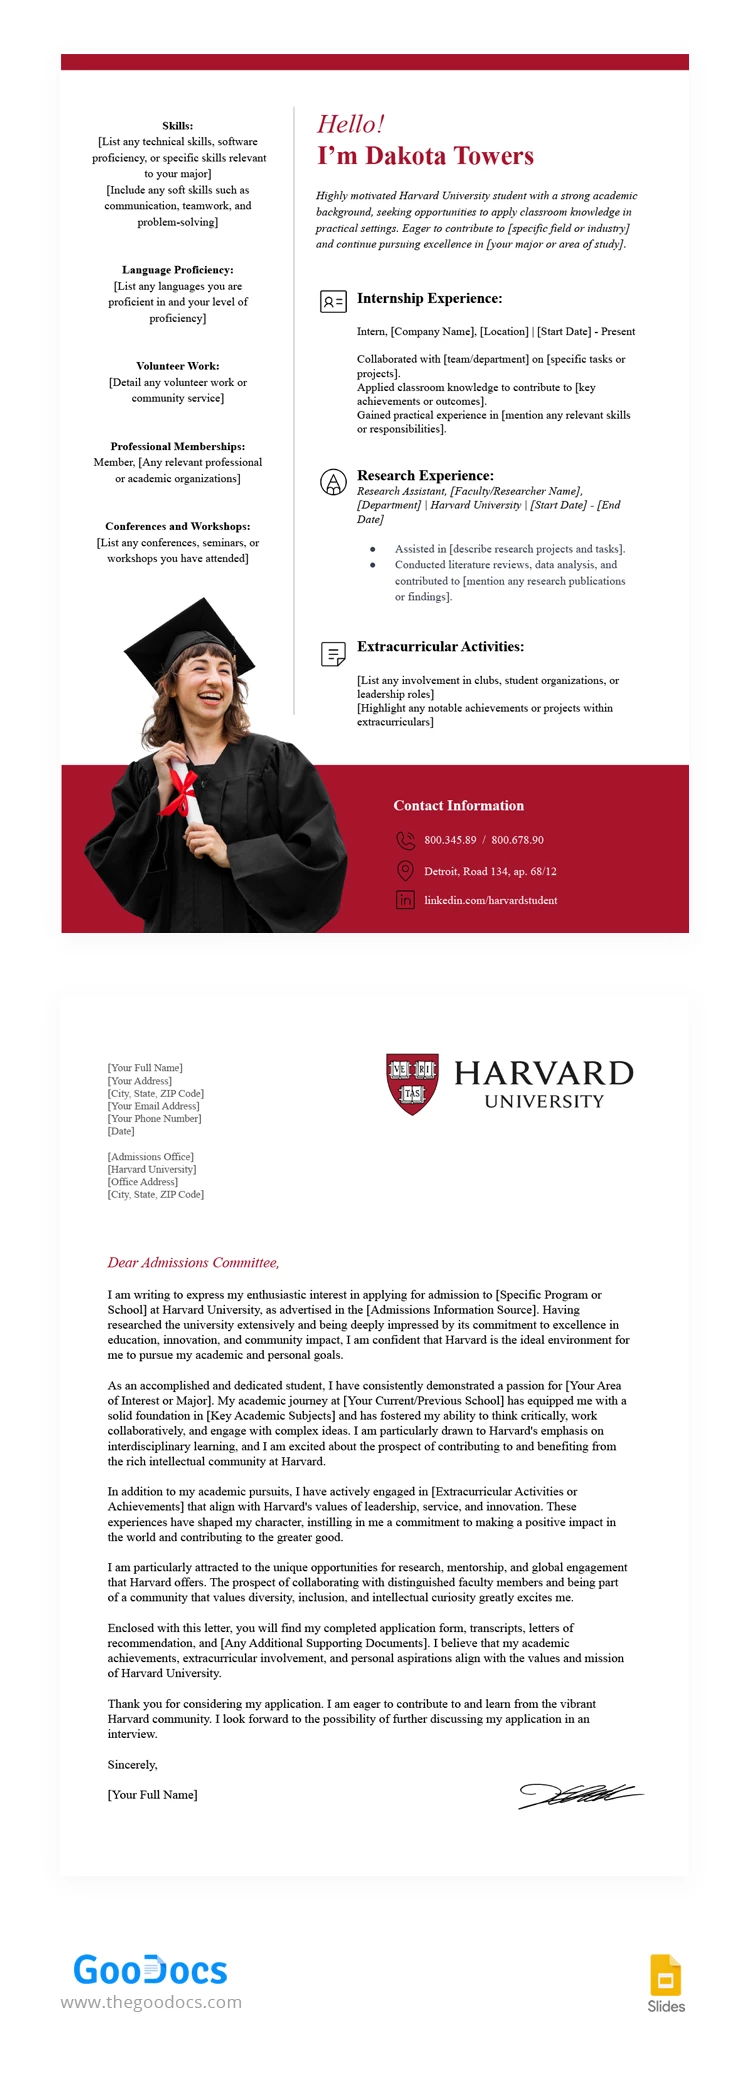 Harvard Resume and Cover Letter - free Google Docs Template - 10068108